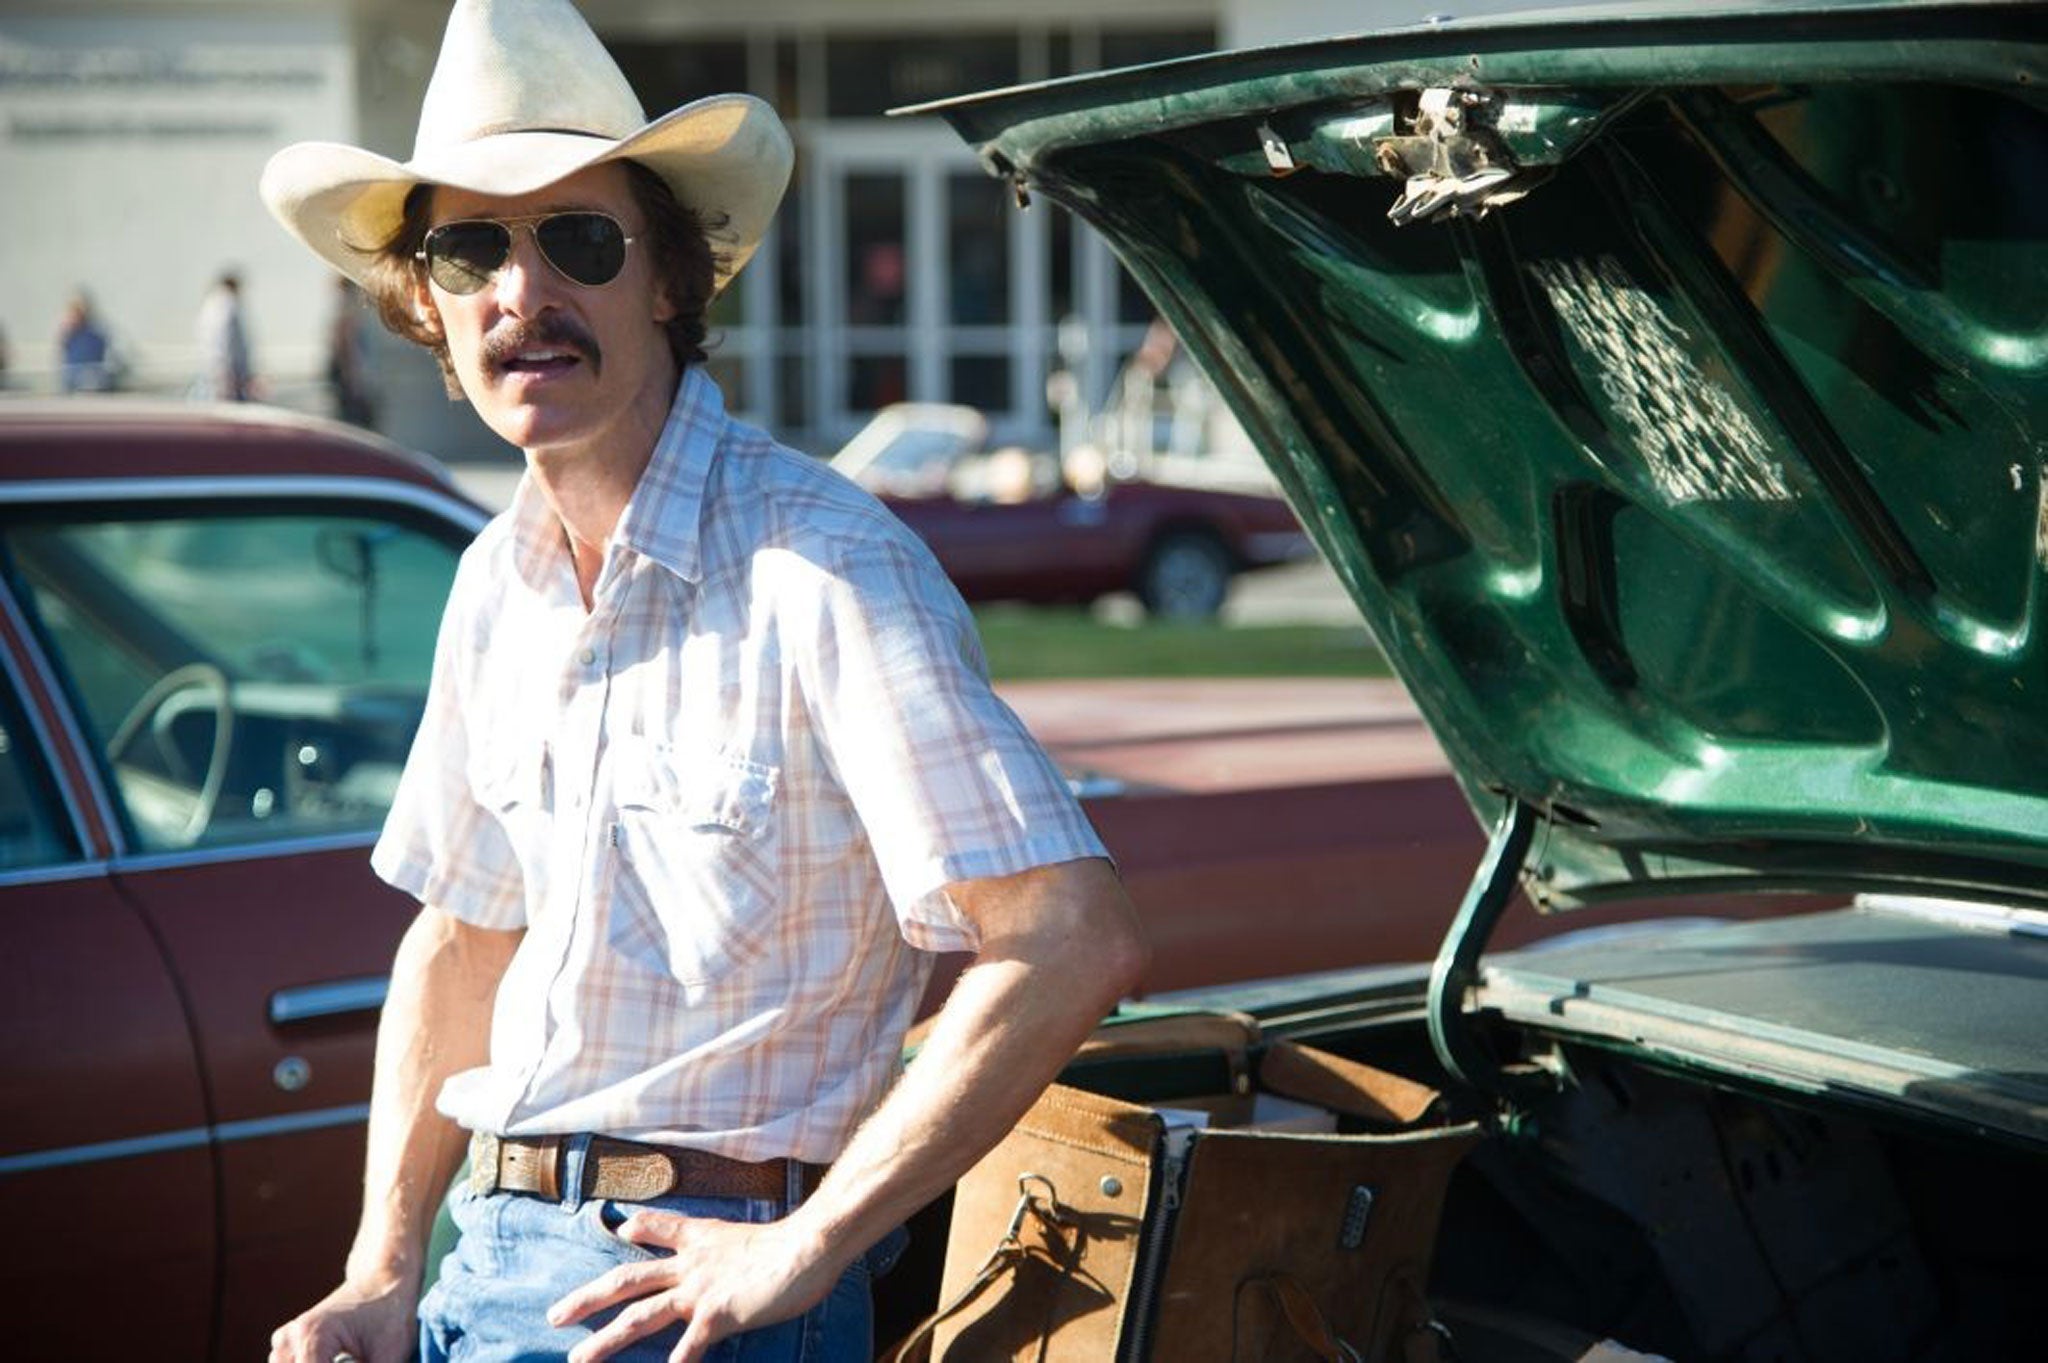 Matthew McConaughey dropped 51lb to play Ron Woodroof in Dallas Buyers Club